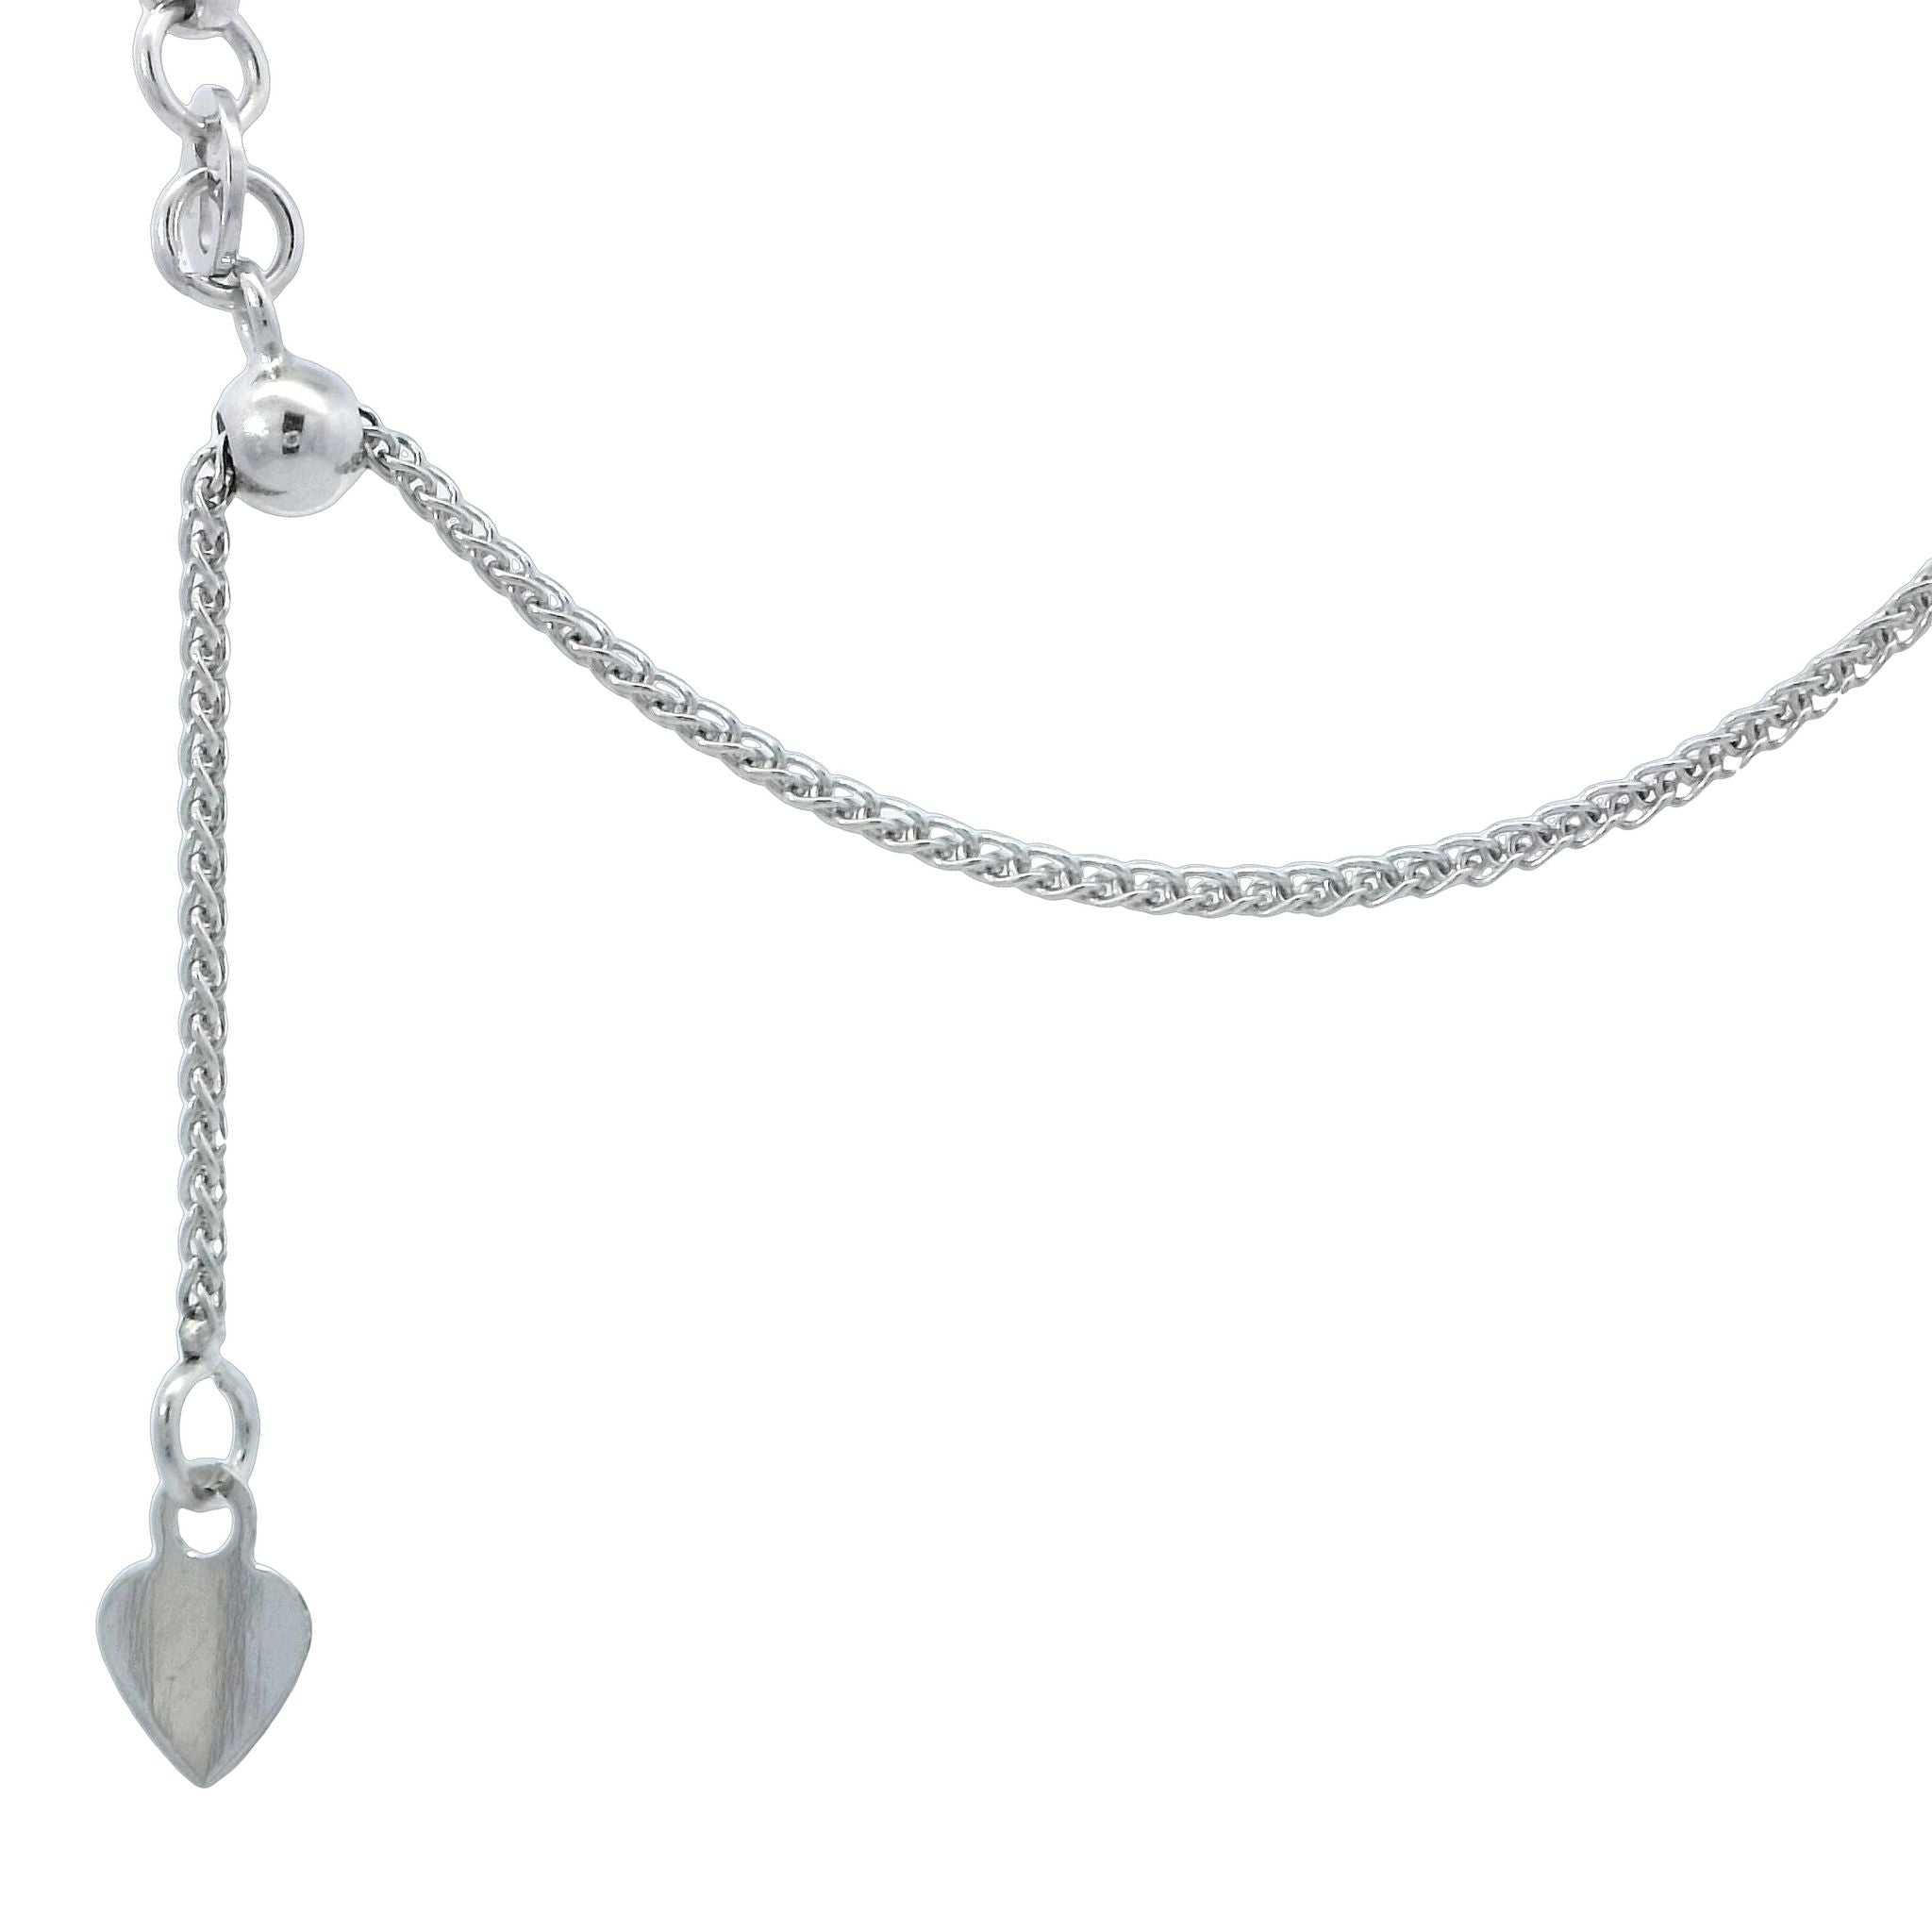 Adjustable Chain in White Gold